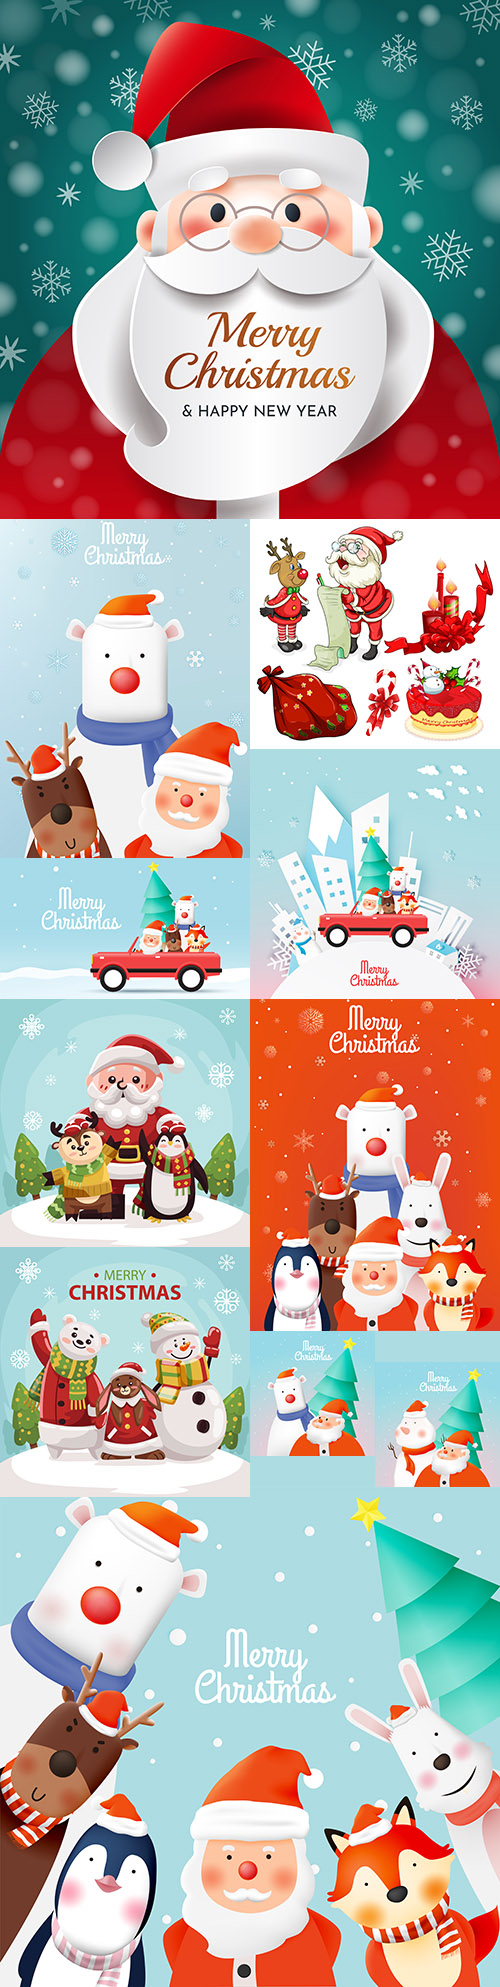 Santa Claus and friends animal cute New Year characters illustrations
